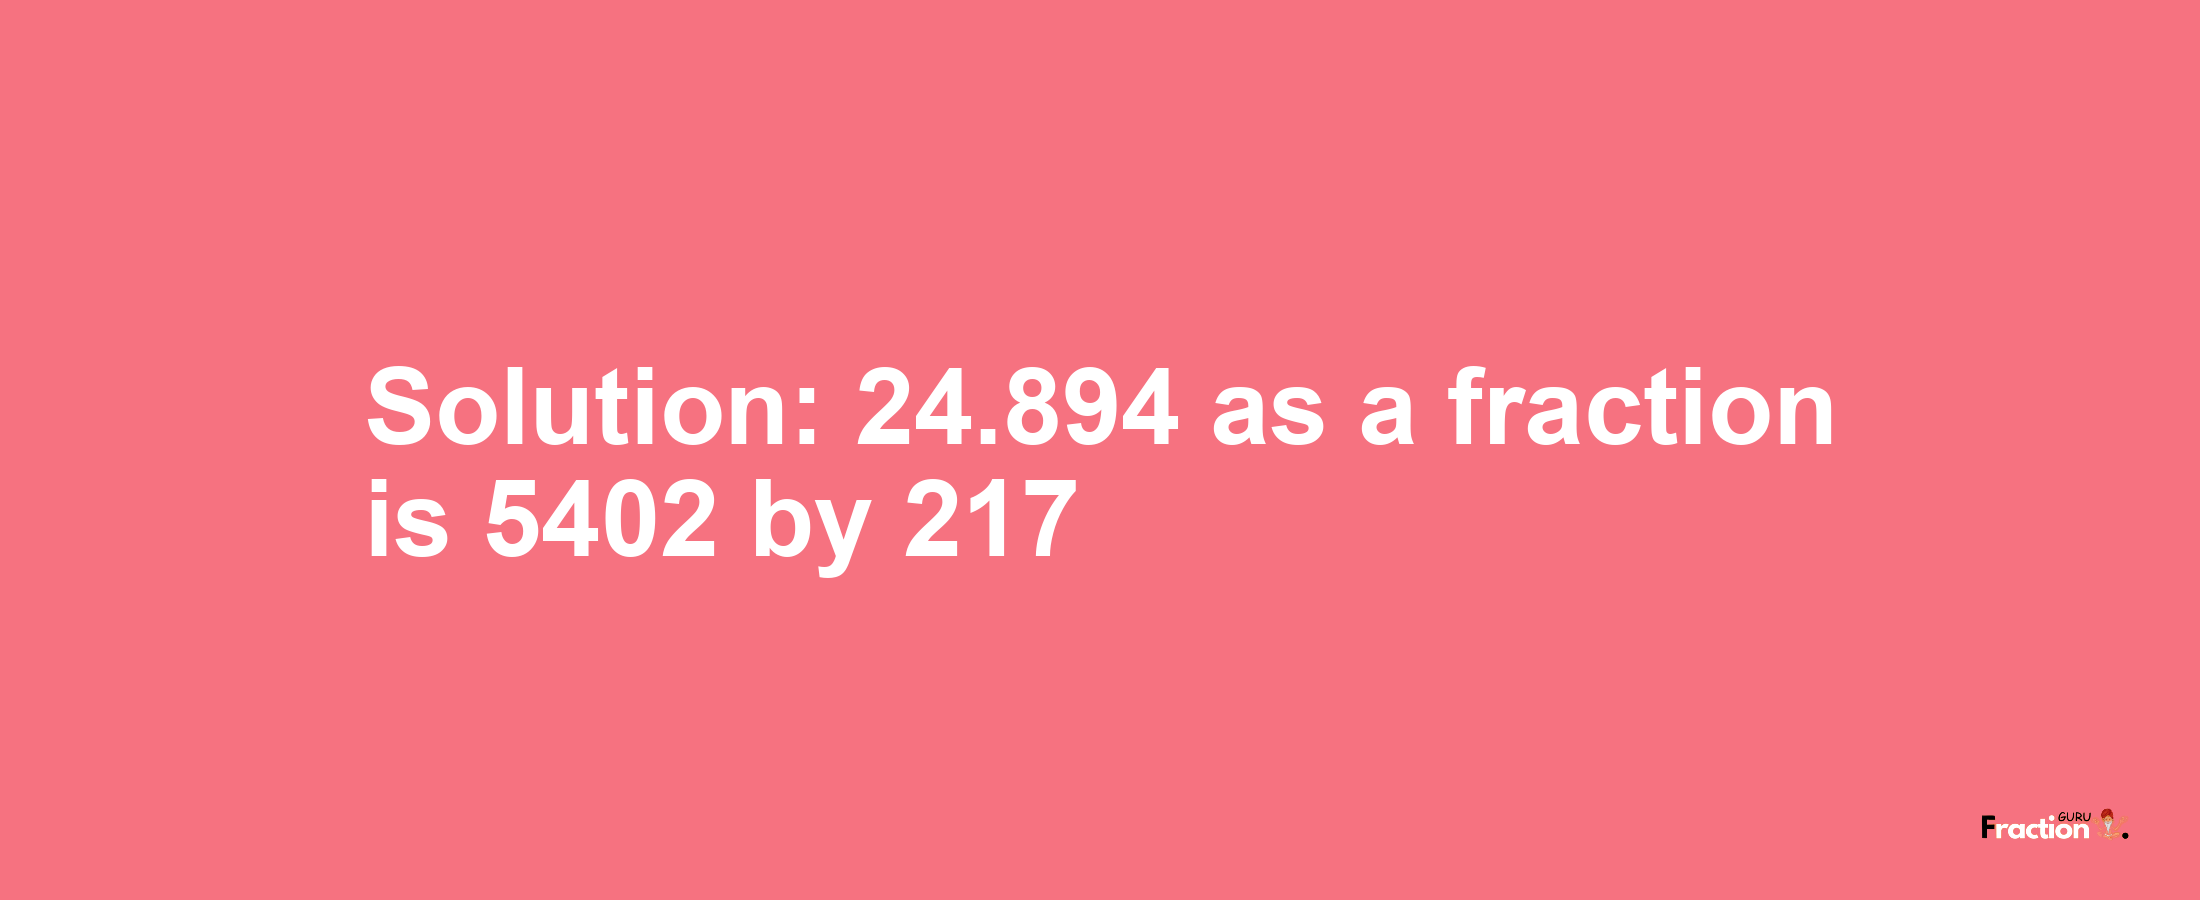 Solution:24.894 as a fraction is 5402/217